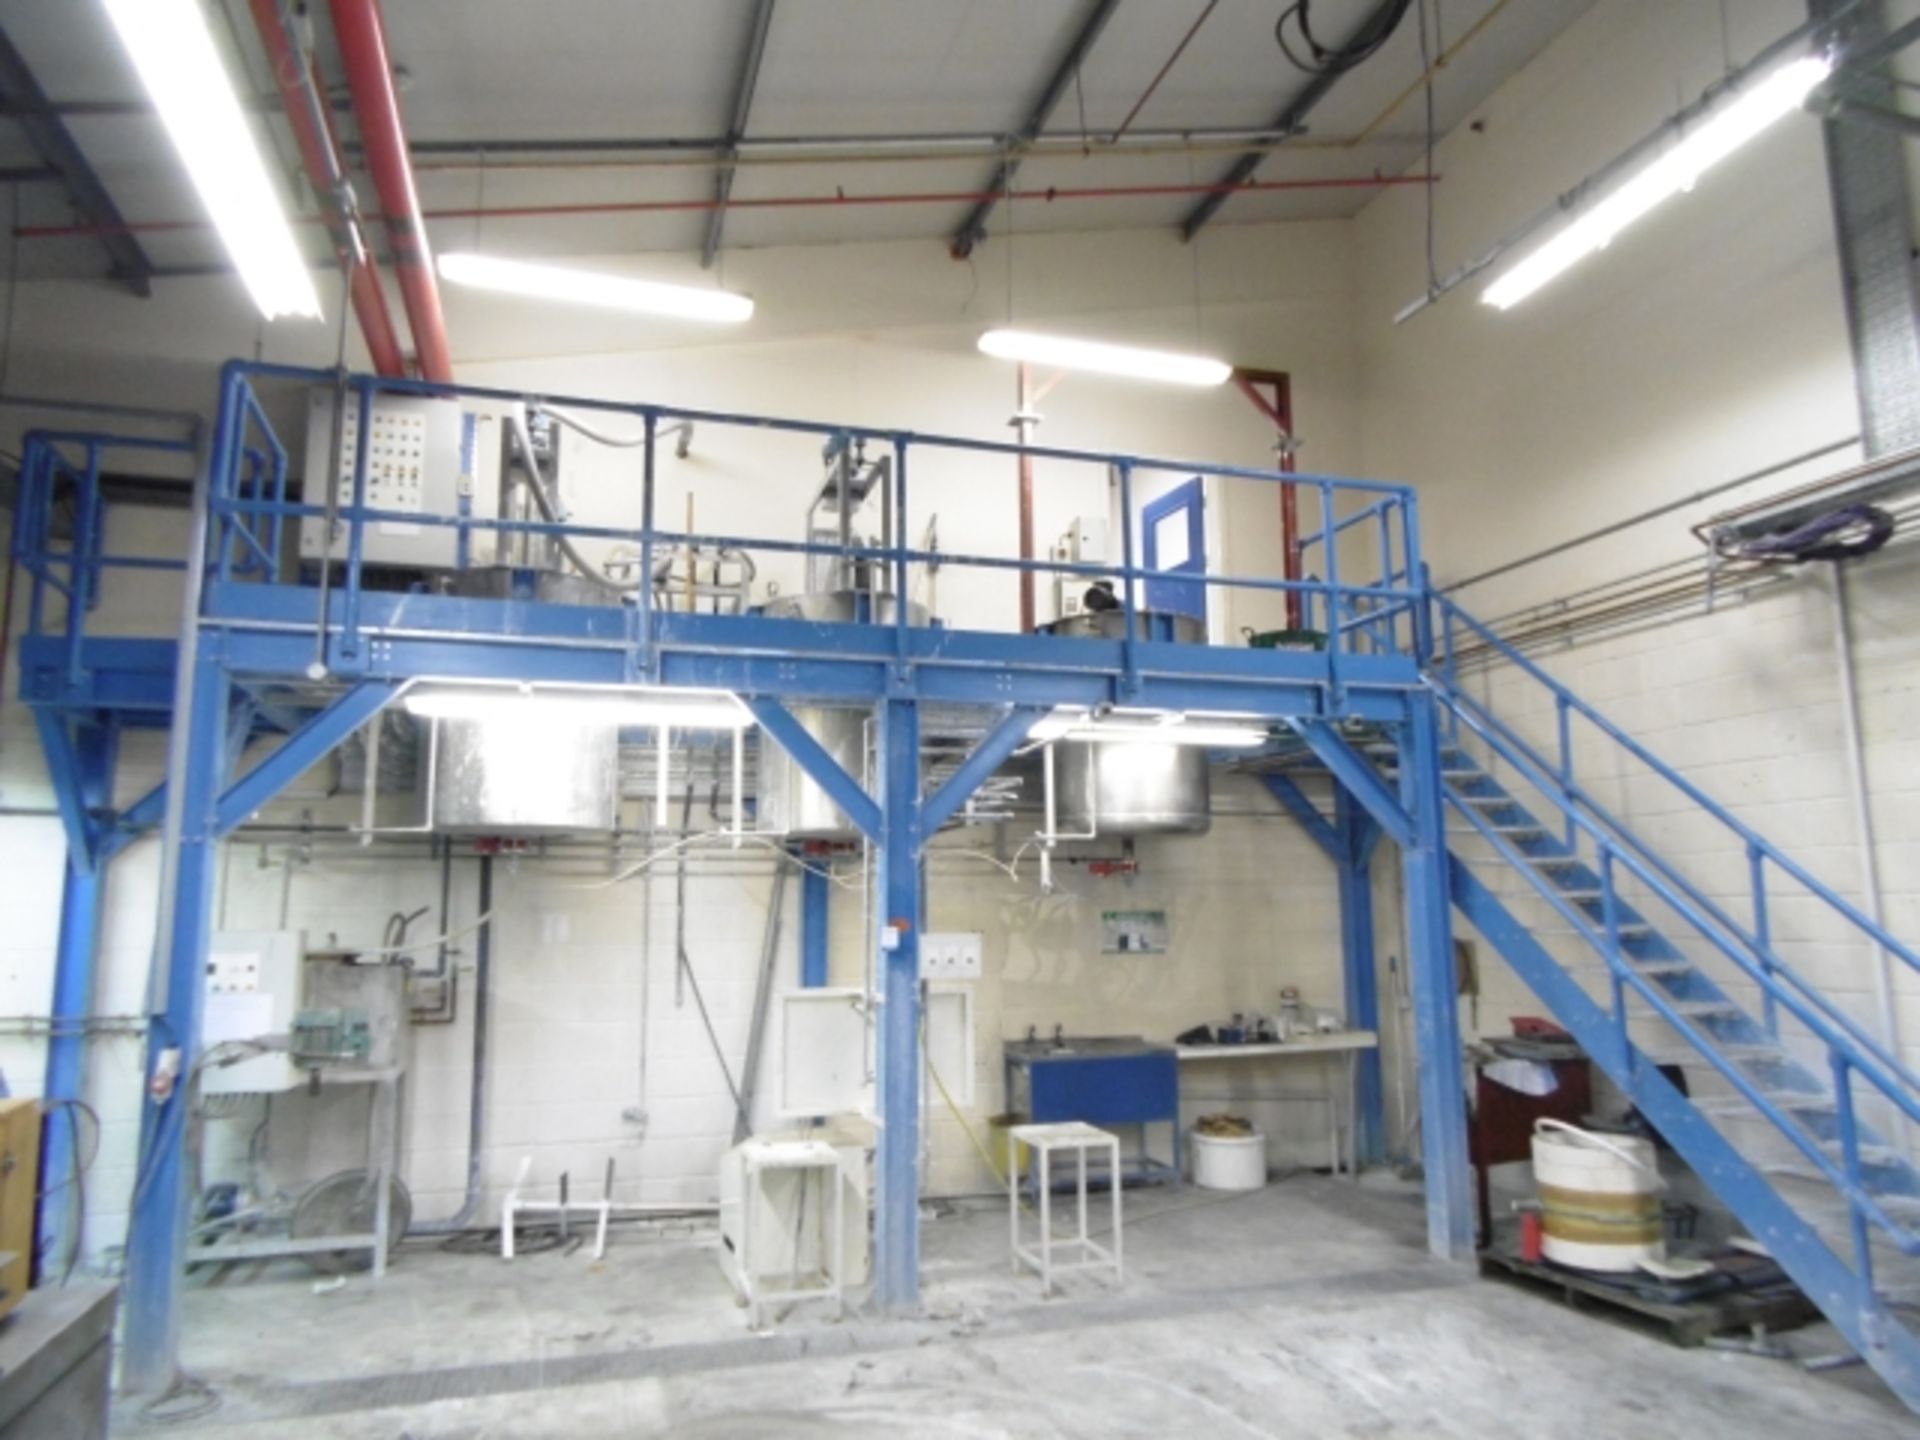 * 2007 TripleTank Slip Mixing Gantry comprising steel two-section gantry with staircase, 3 x